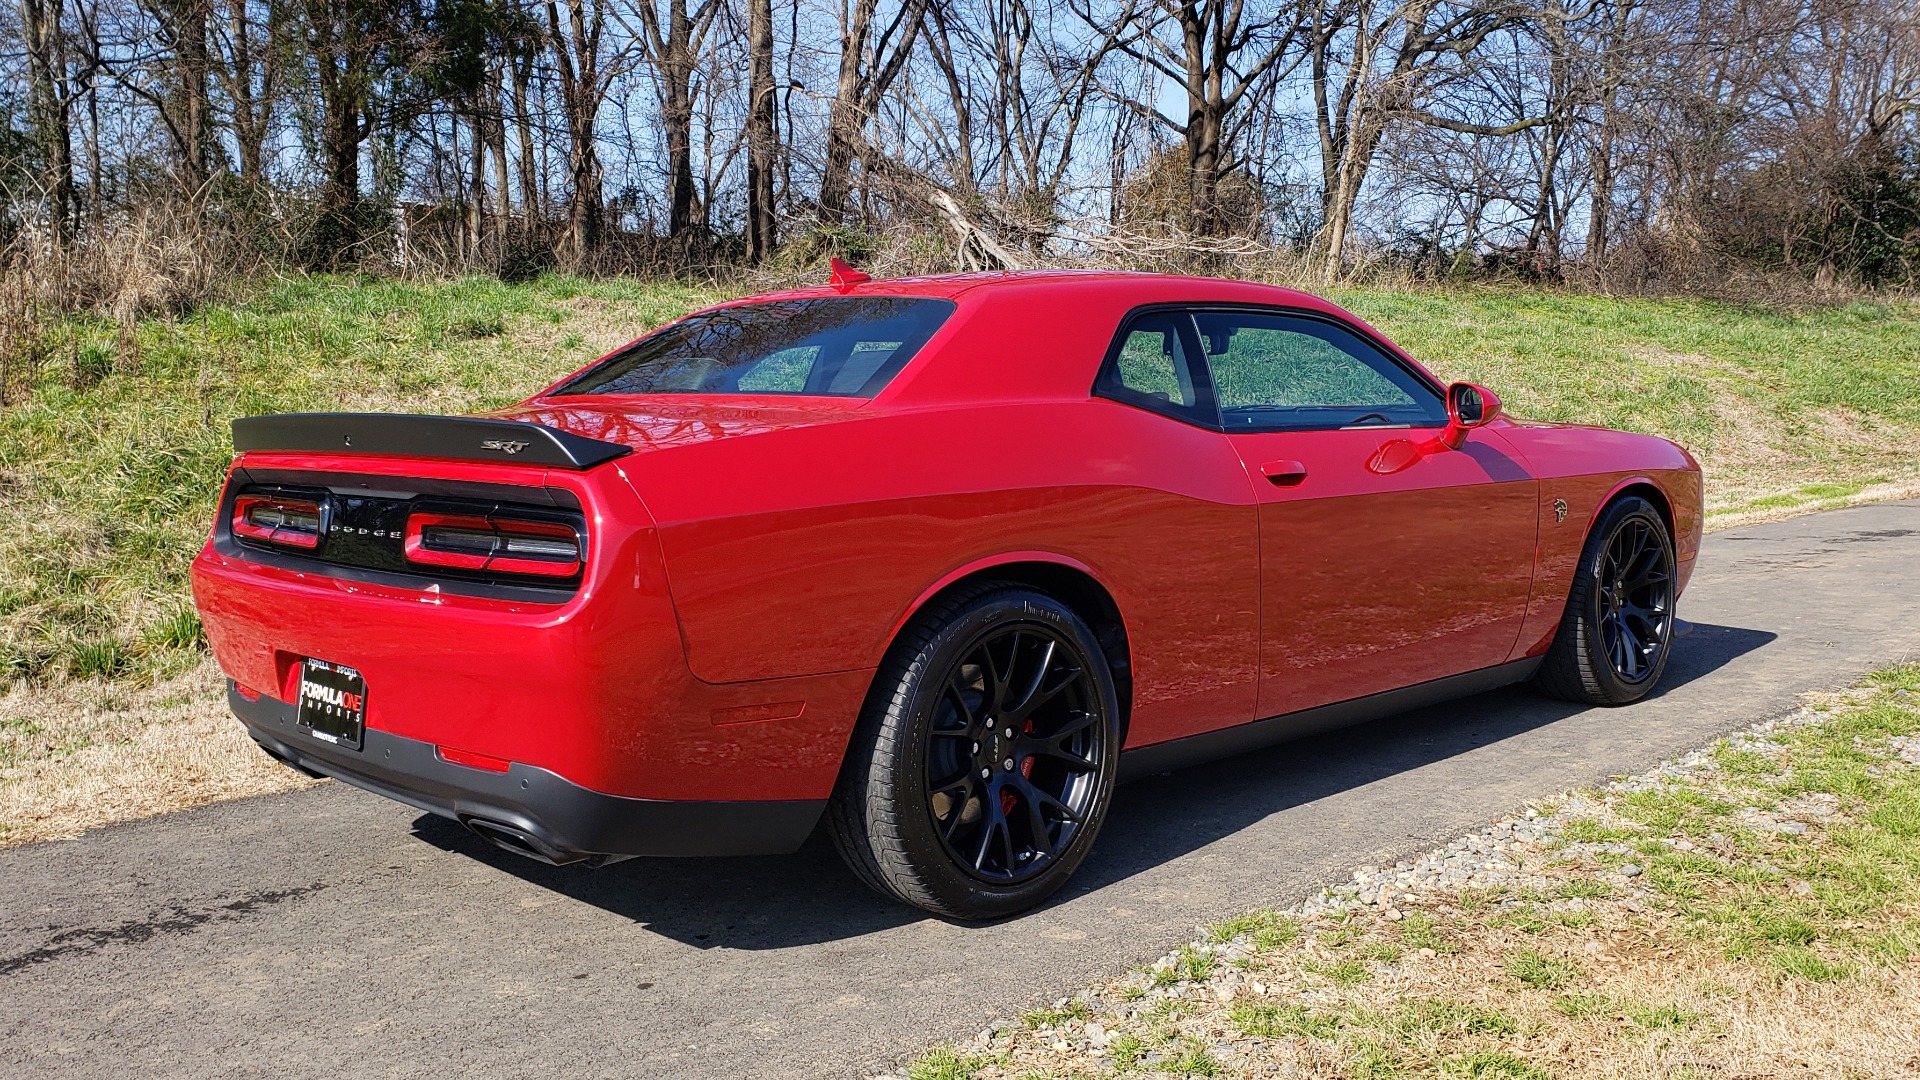 Used 2016 Dodge CHALLENGER SRT HELLCAT / NAV / SUNROOF / AUTO / REARVIEW for sale Sold at Formula Imports in Charlotte NC 28227 6